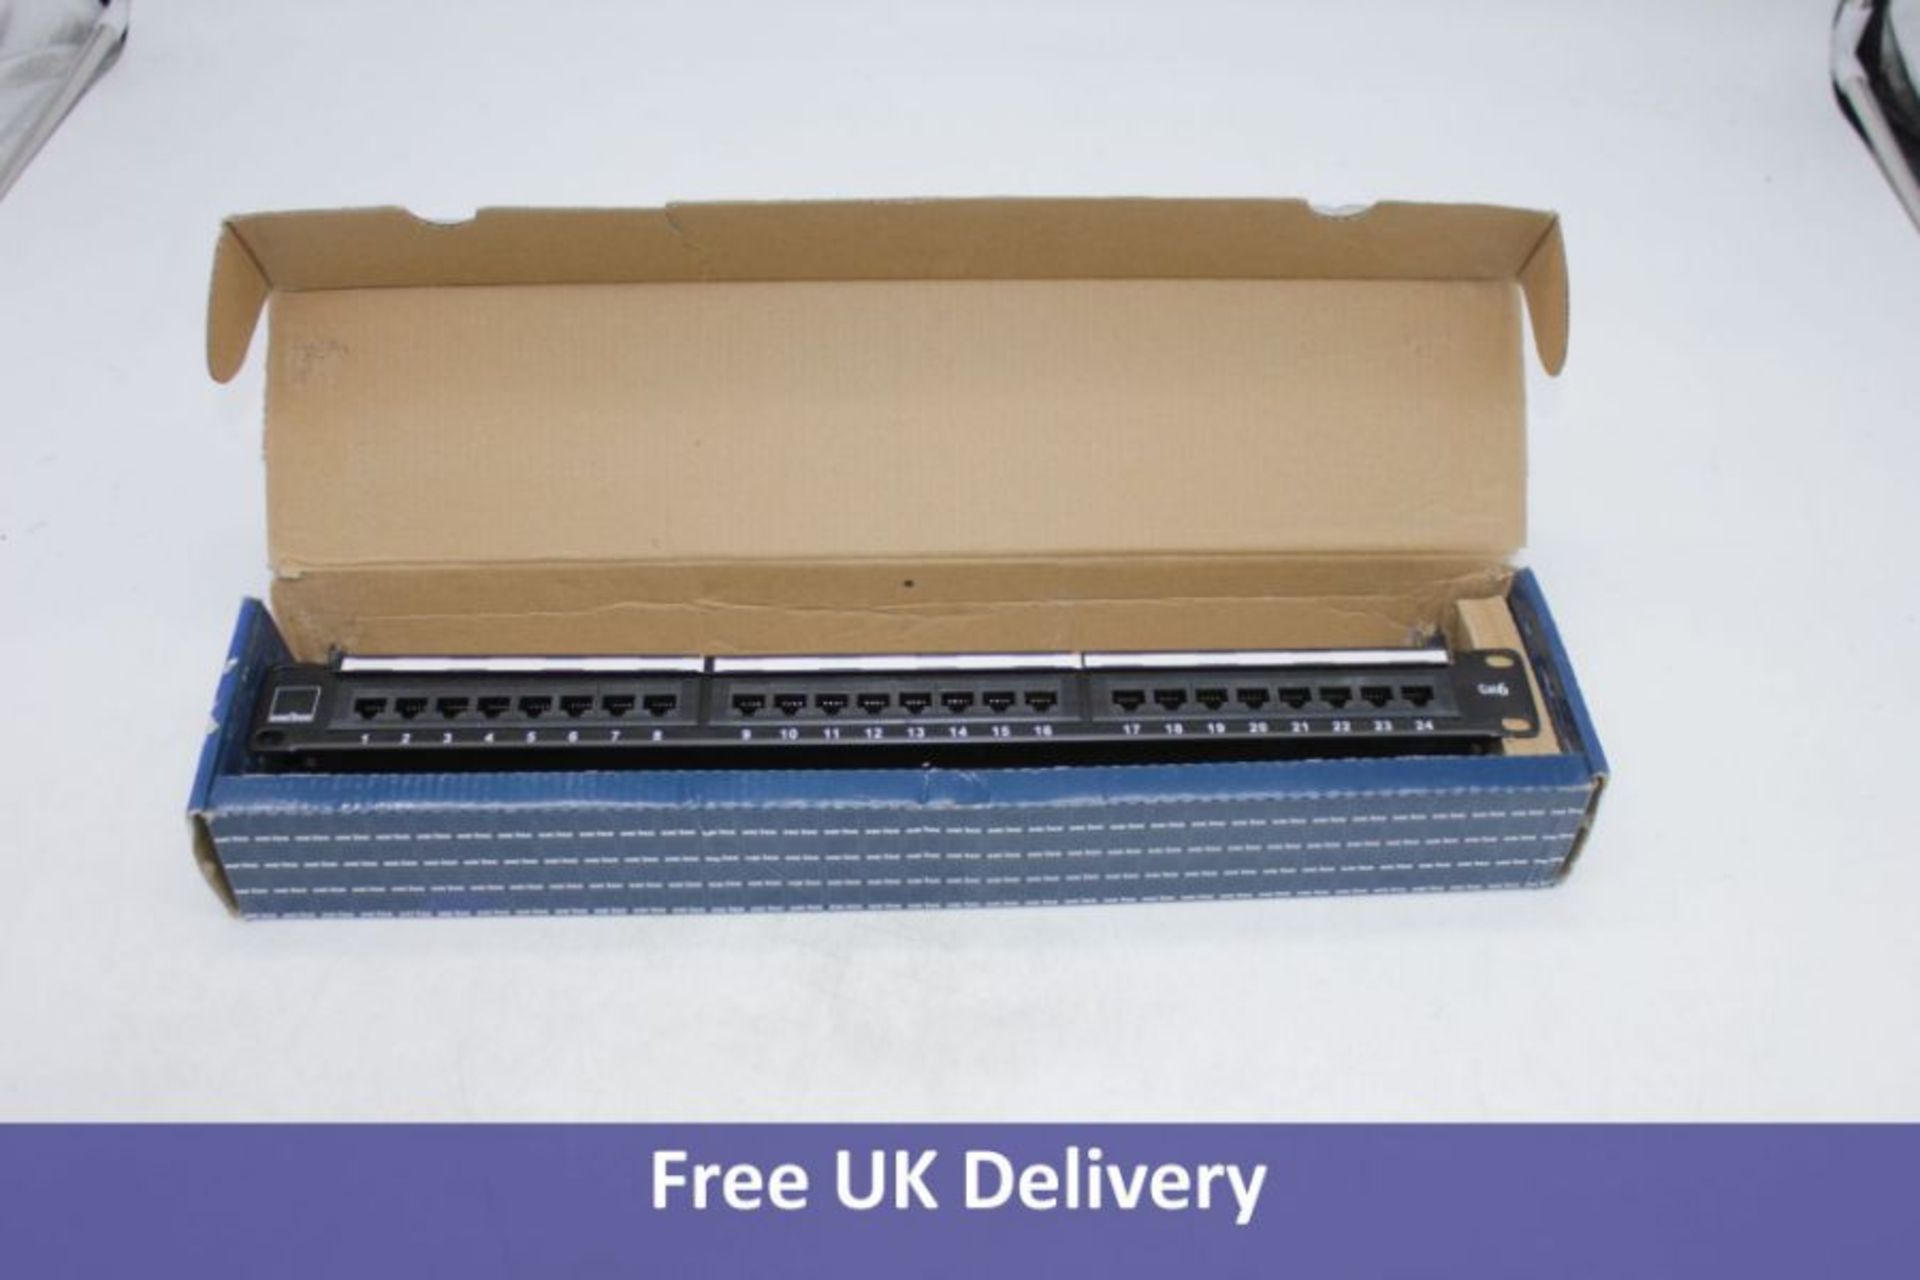 Emitex CAT6 1U 24 Port Patch Panel with Mount. One Attachment Clip Damaged